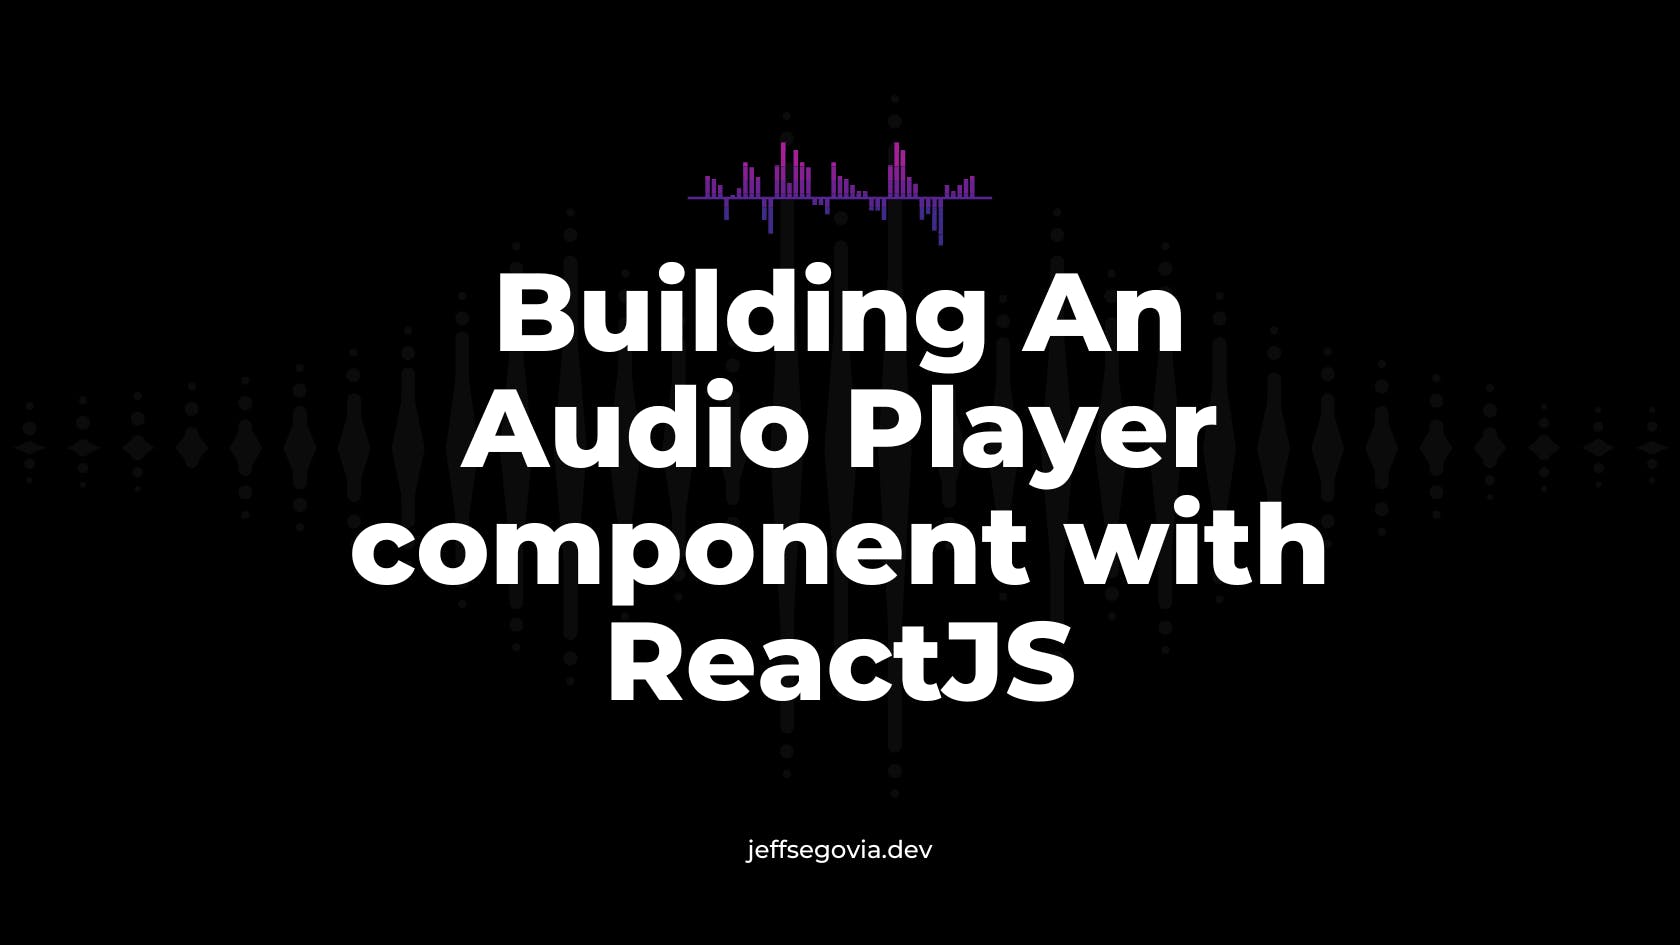 Building an Audio Player With ReactJS